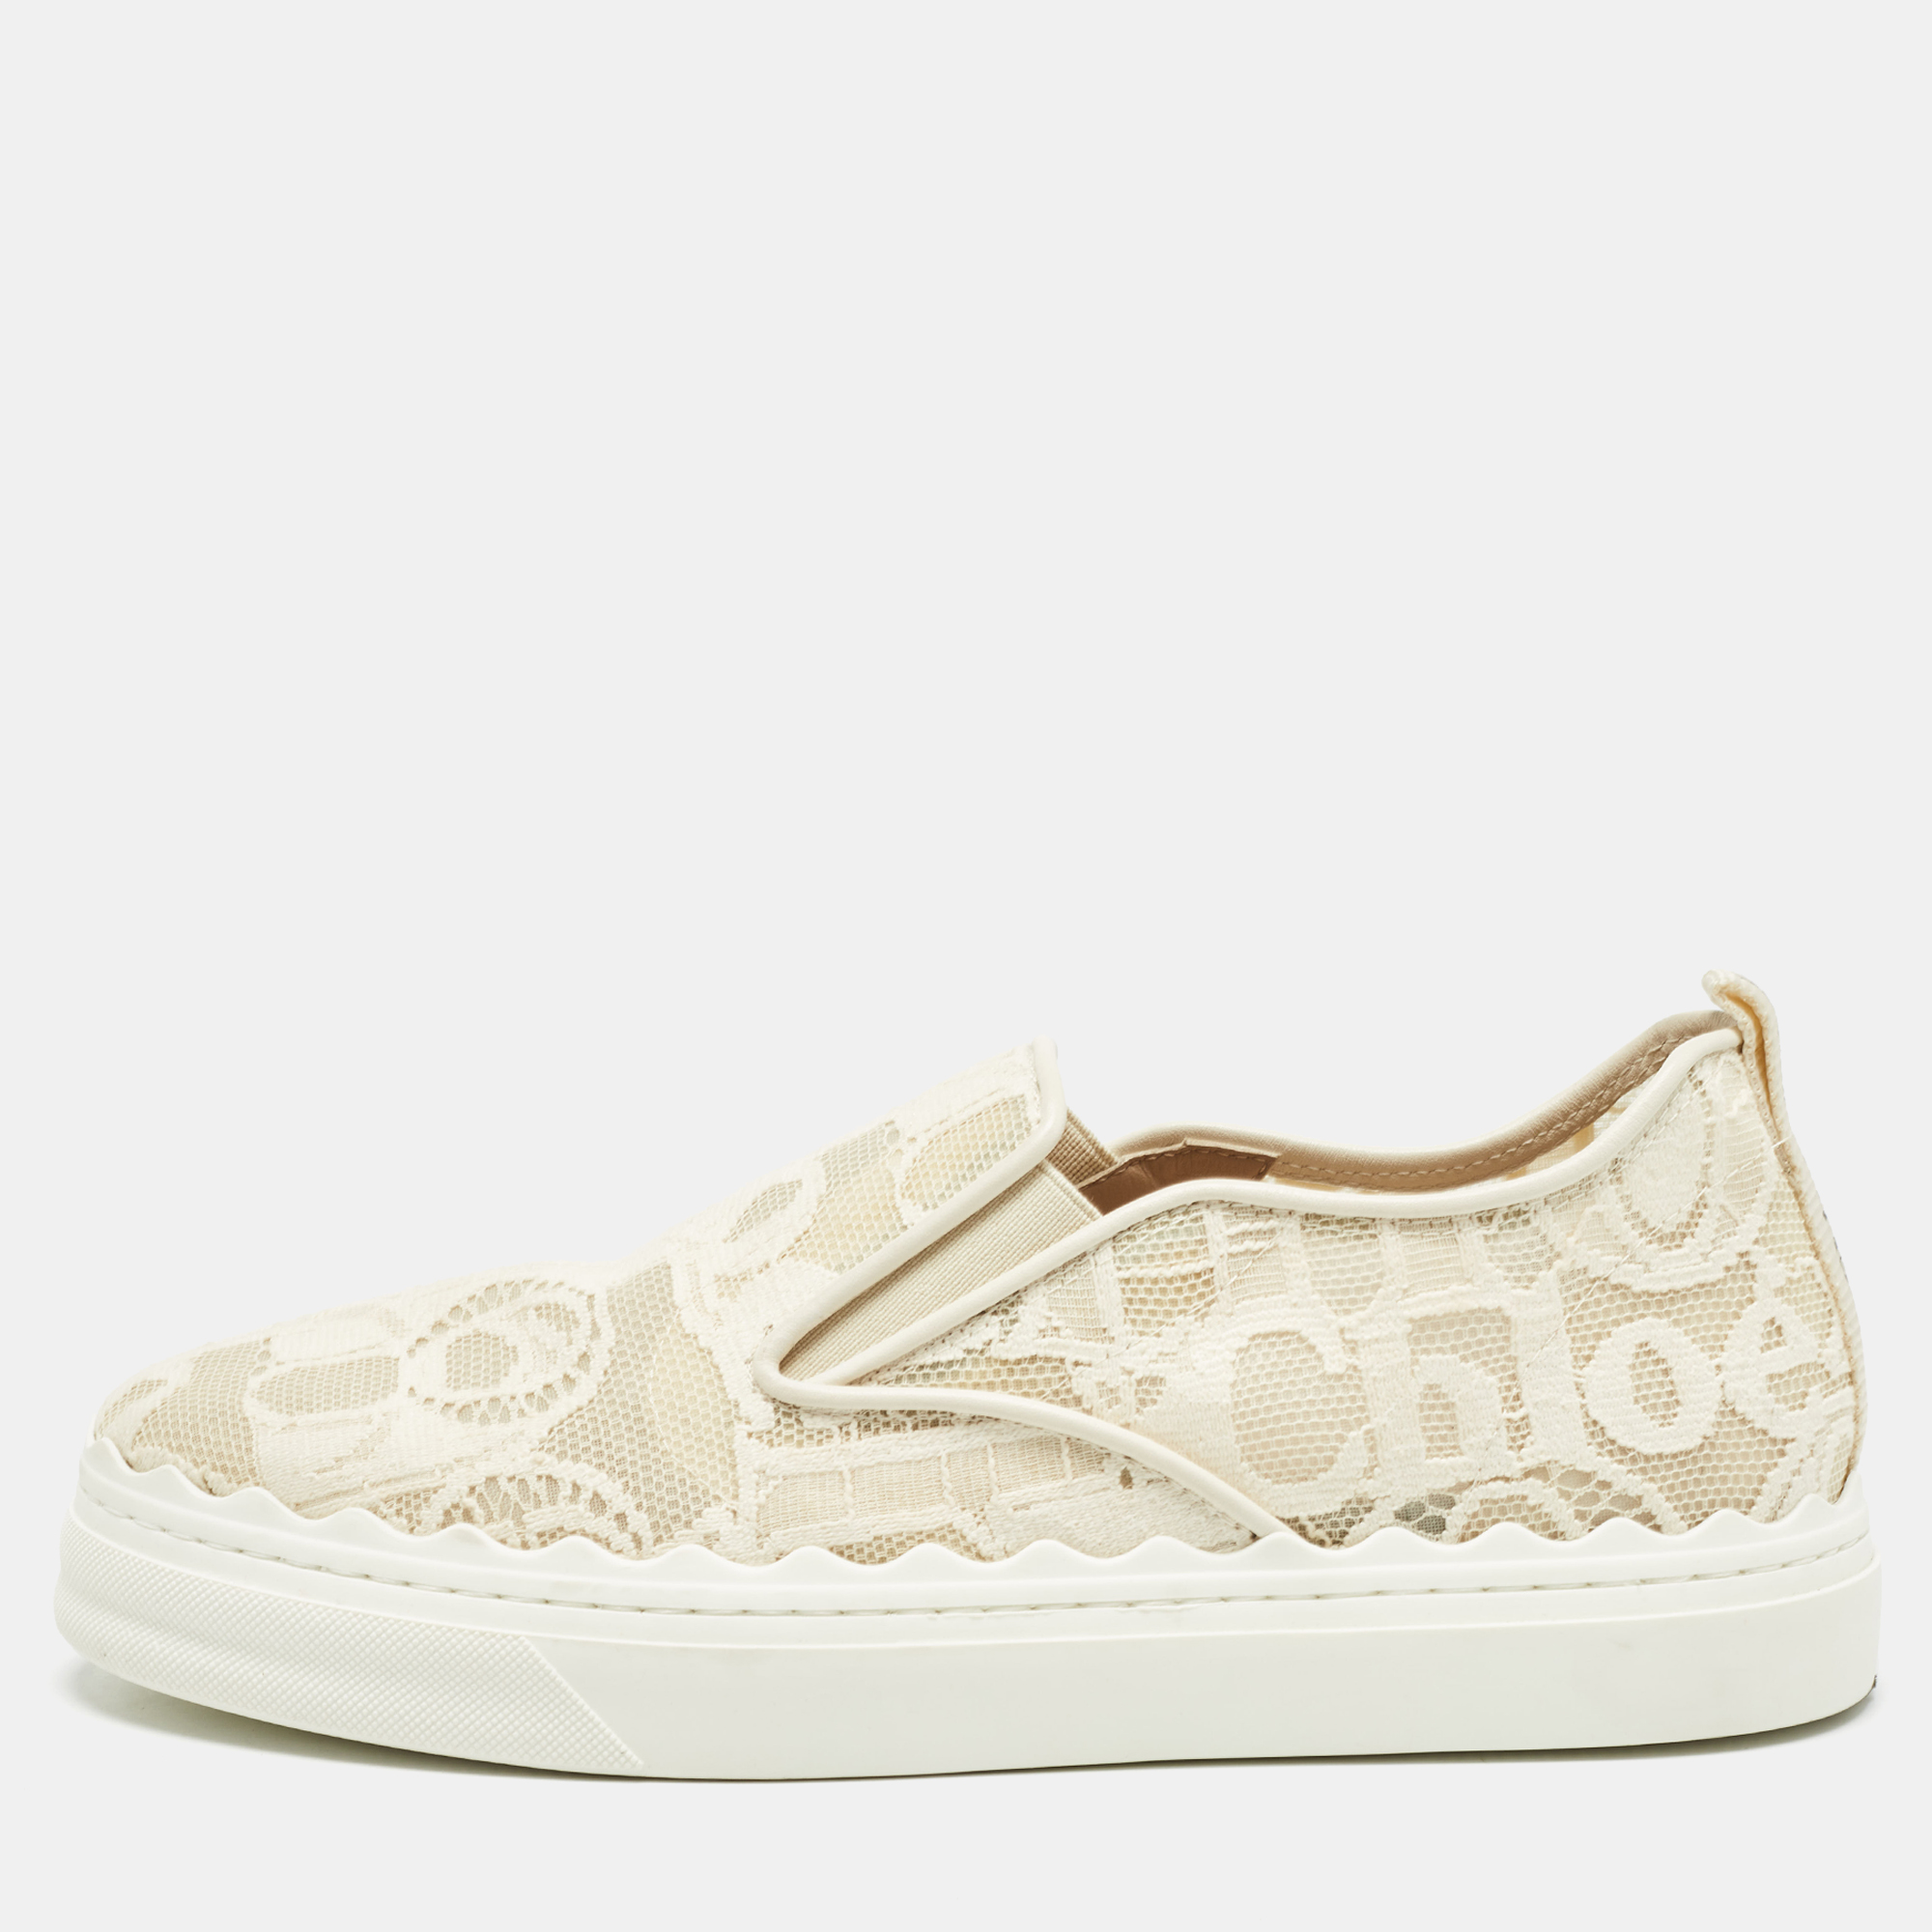 

Chloe White Floral Lace and Mesh Scalloped Accent Slip On Sneakers Size